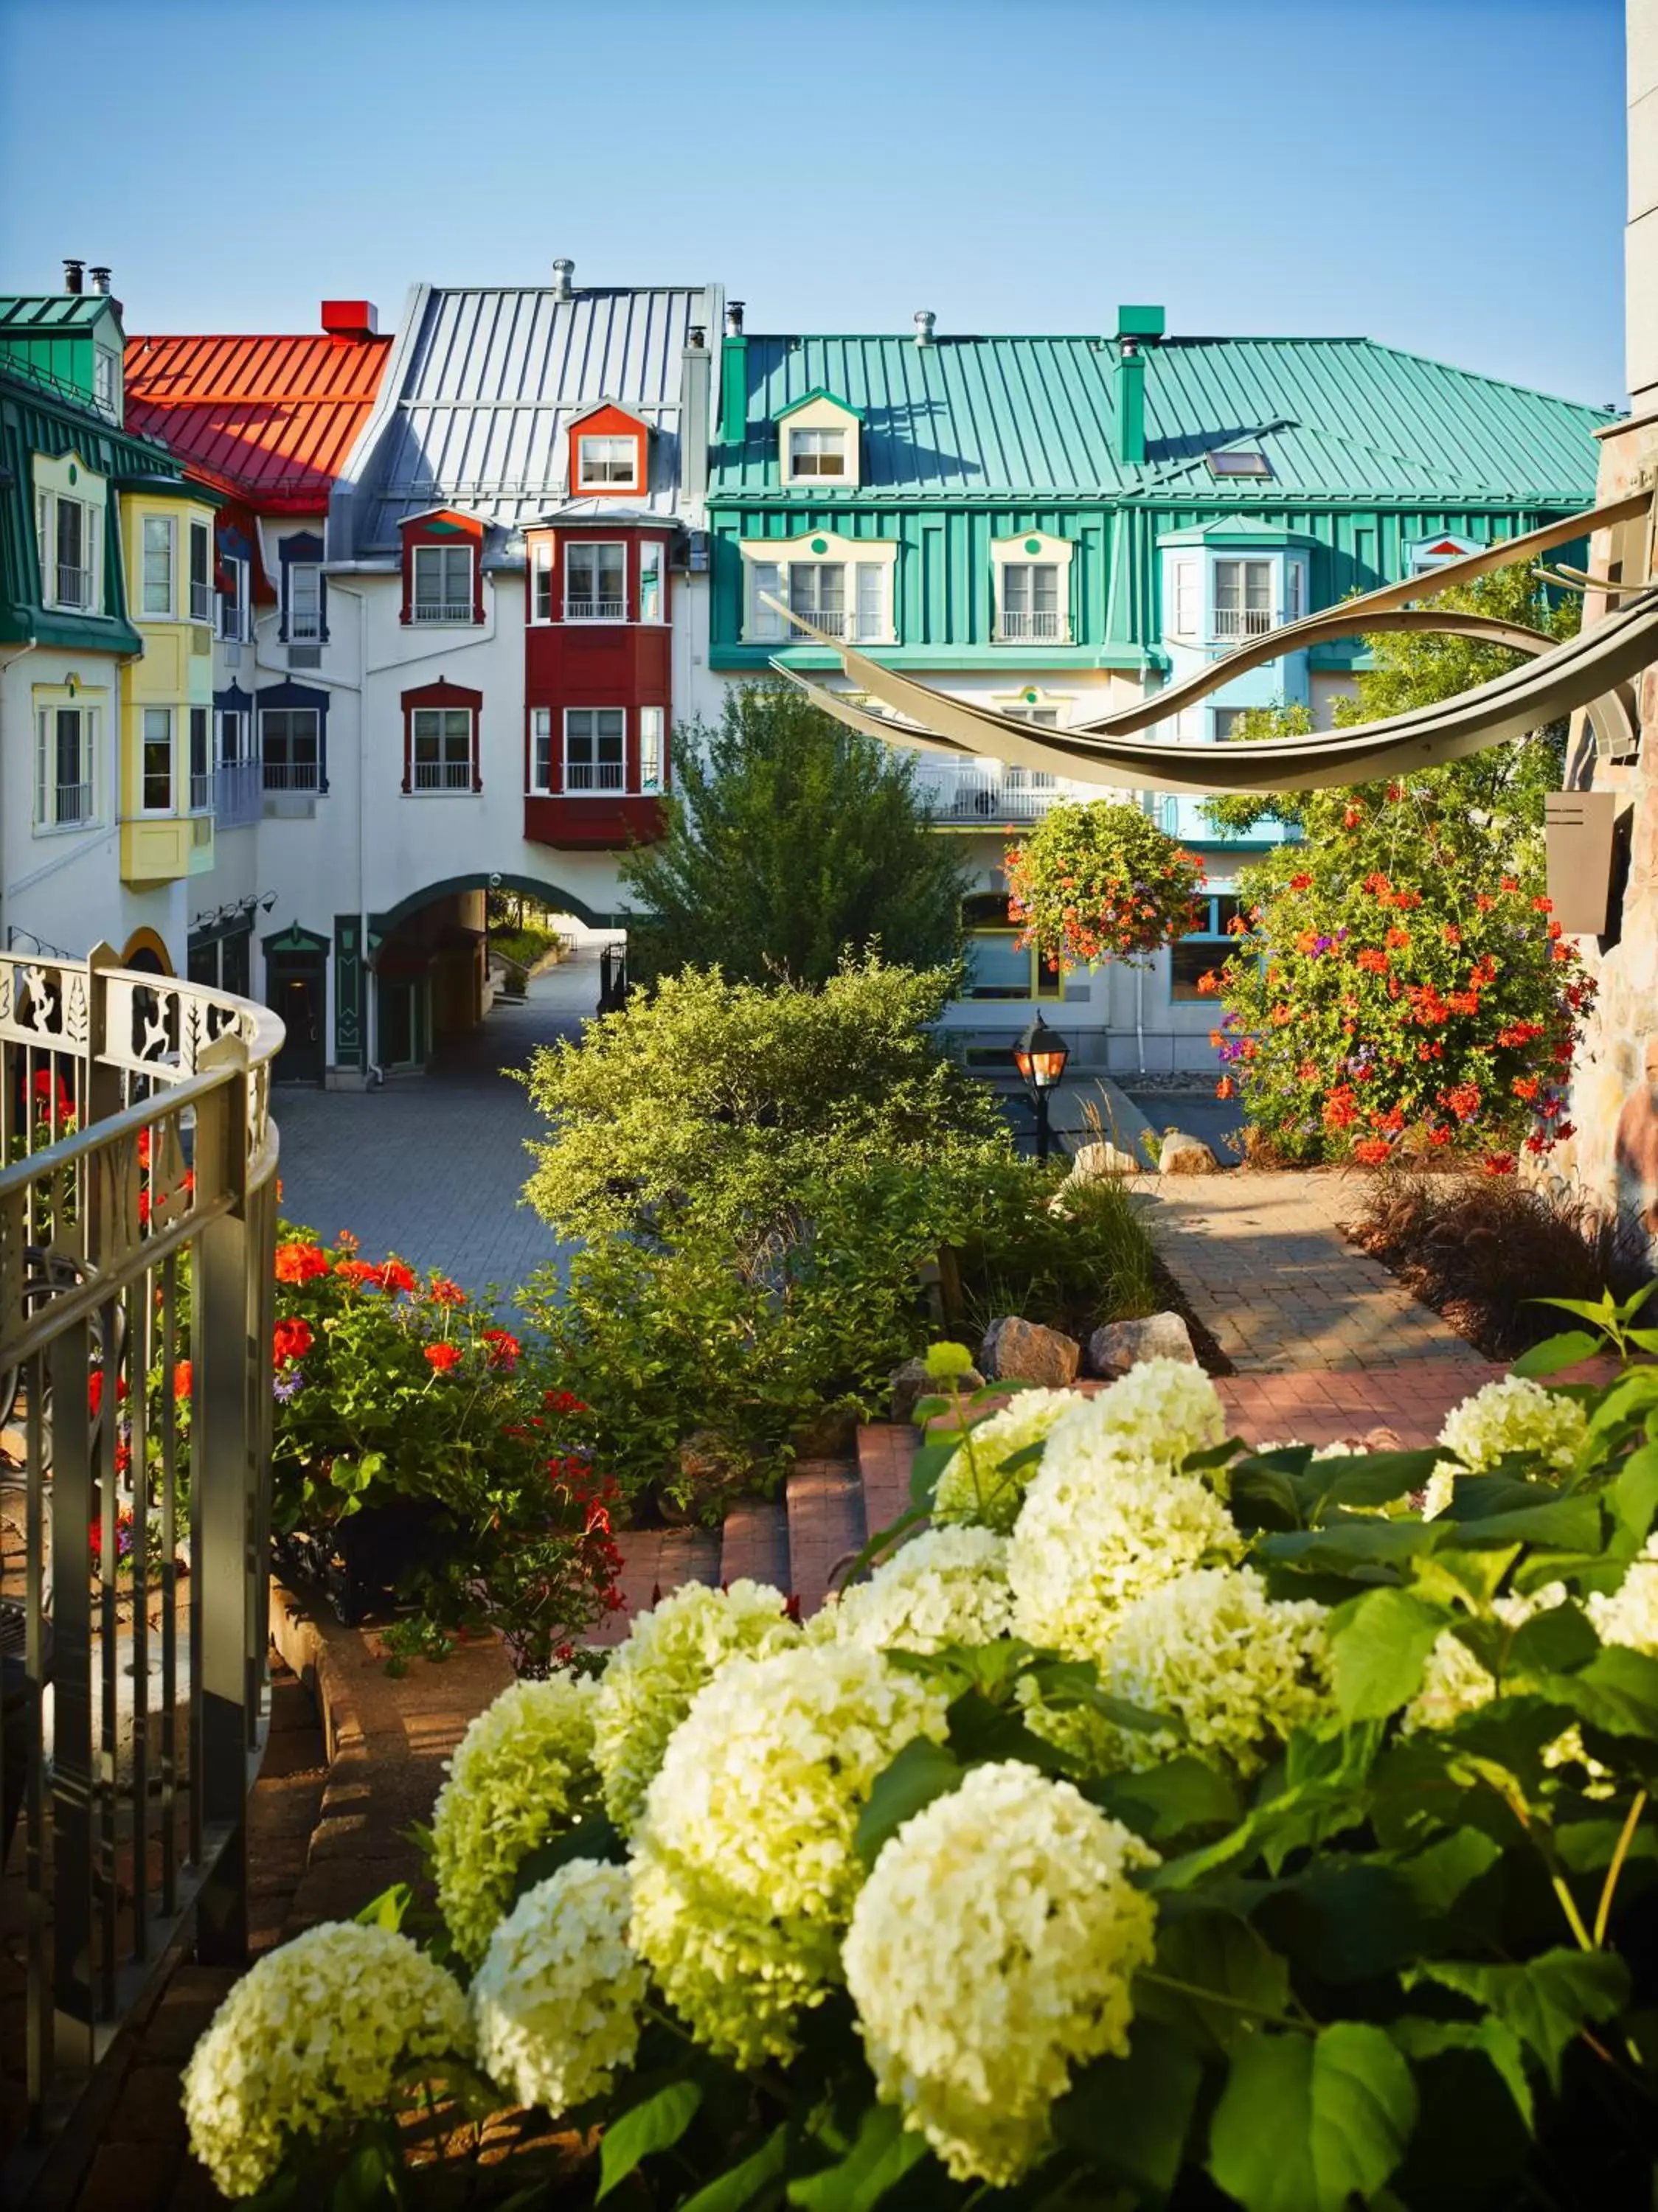 Area and facilities in Fairmont Tremblant